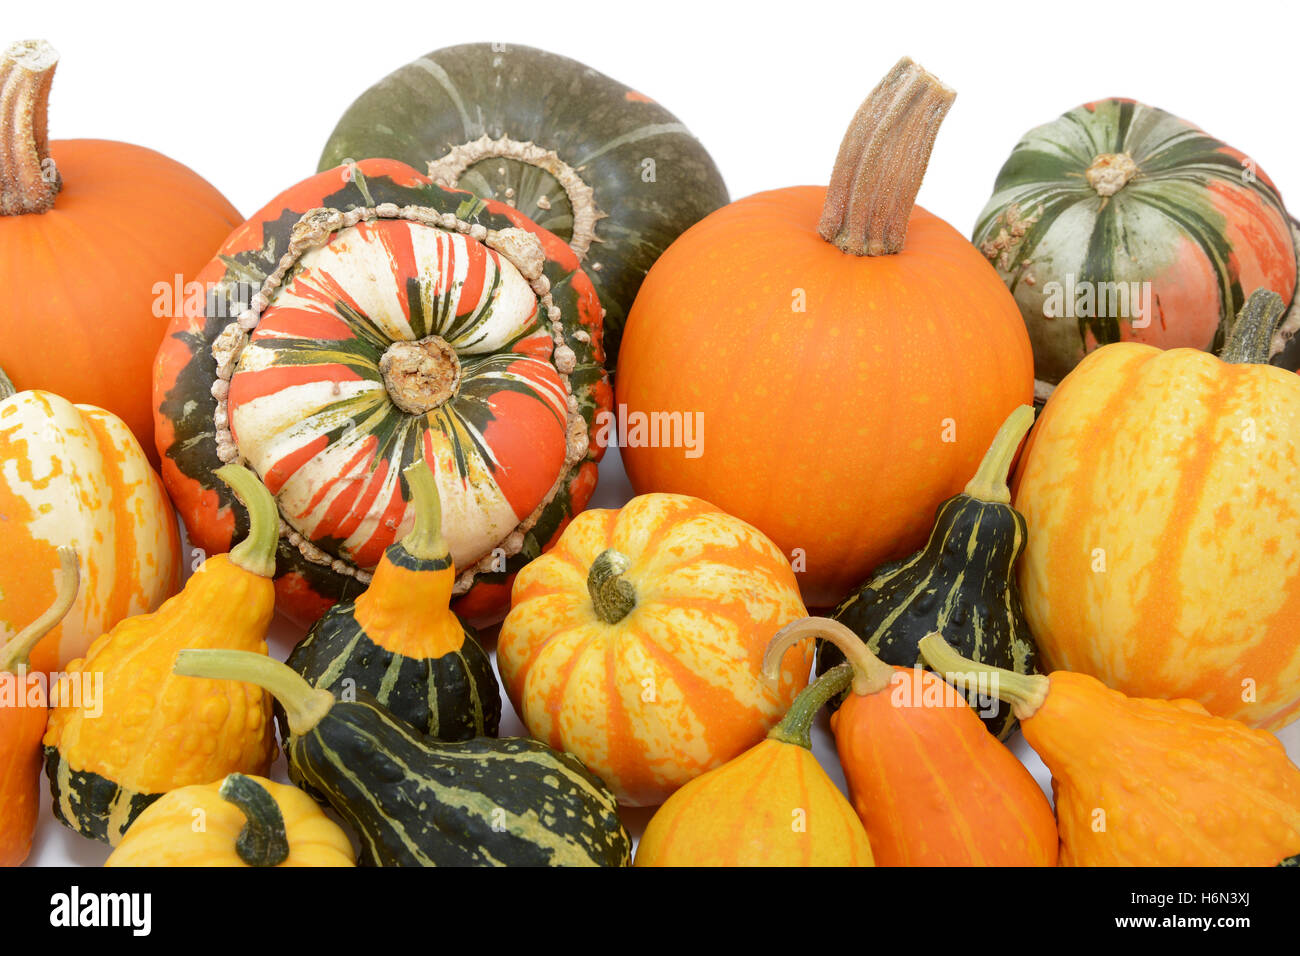 Pile of autumn pumpkins and squashes with ornamental gourds, against a white background Stock Photo